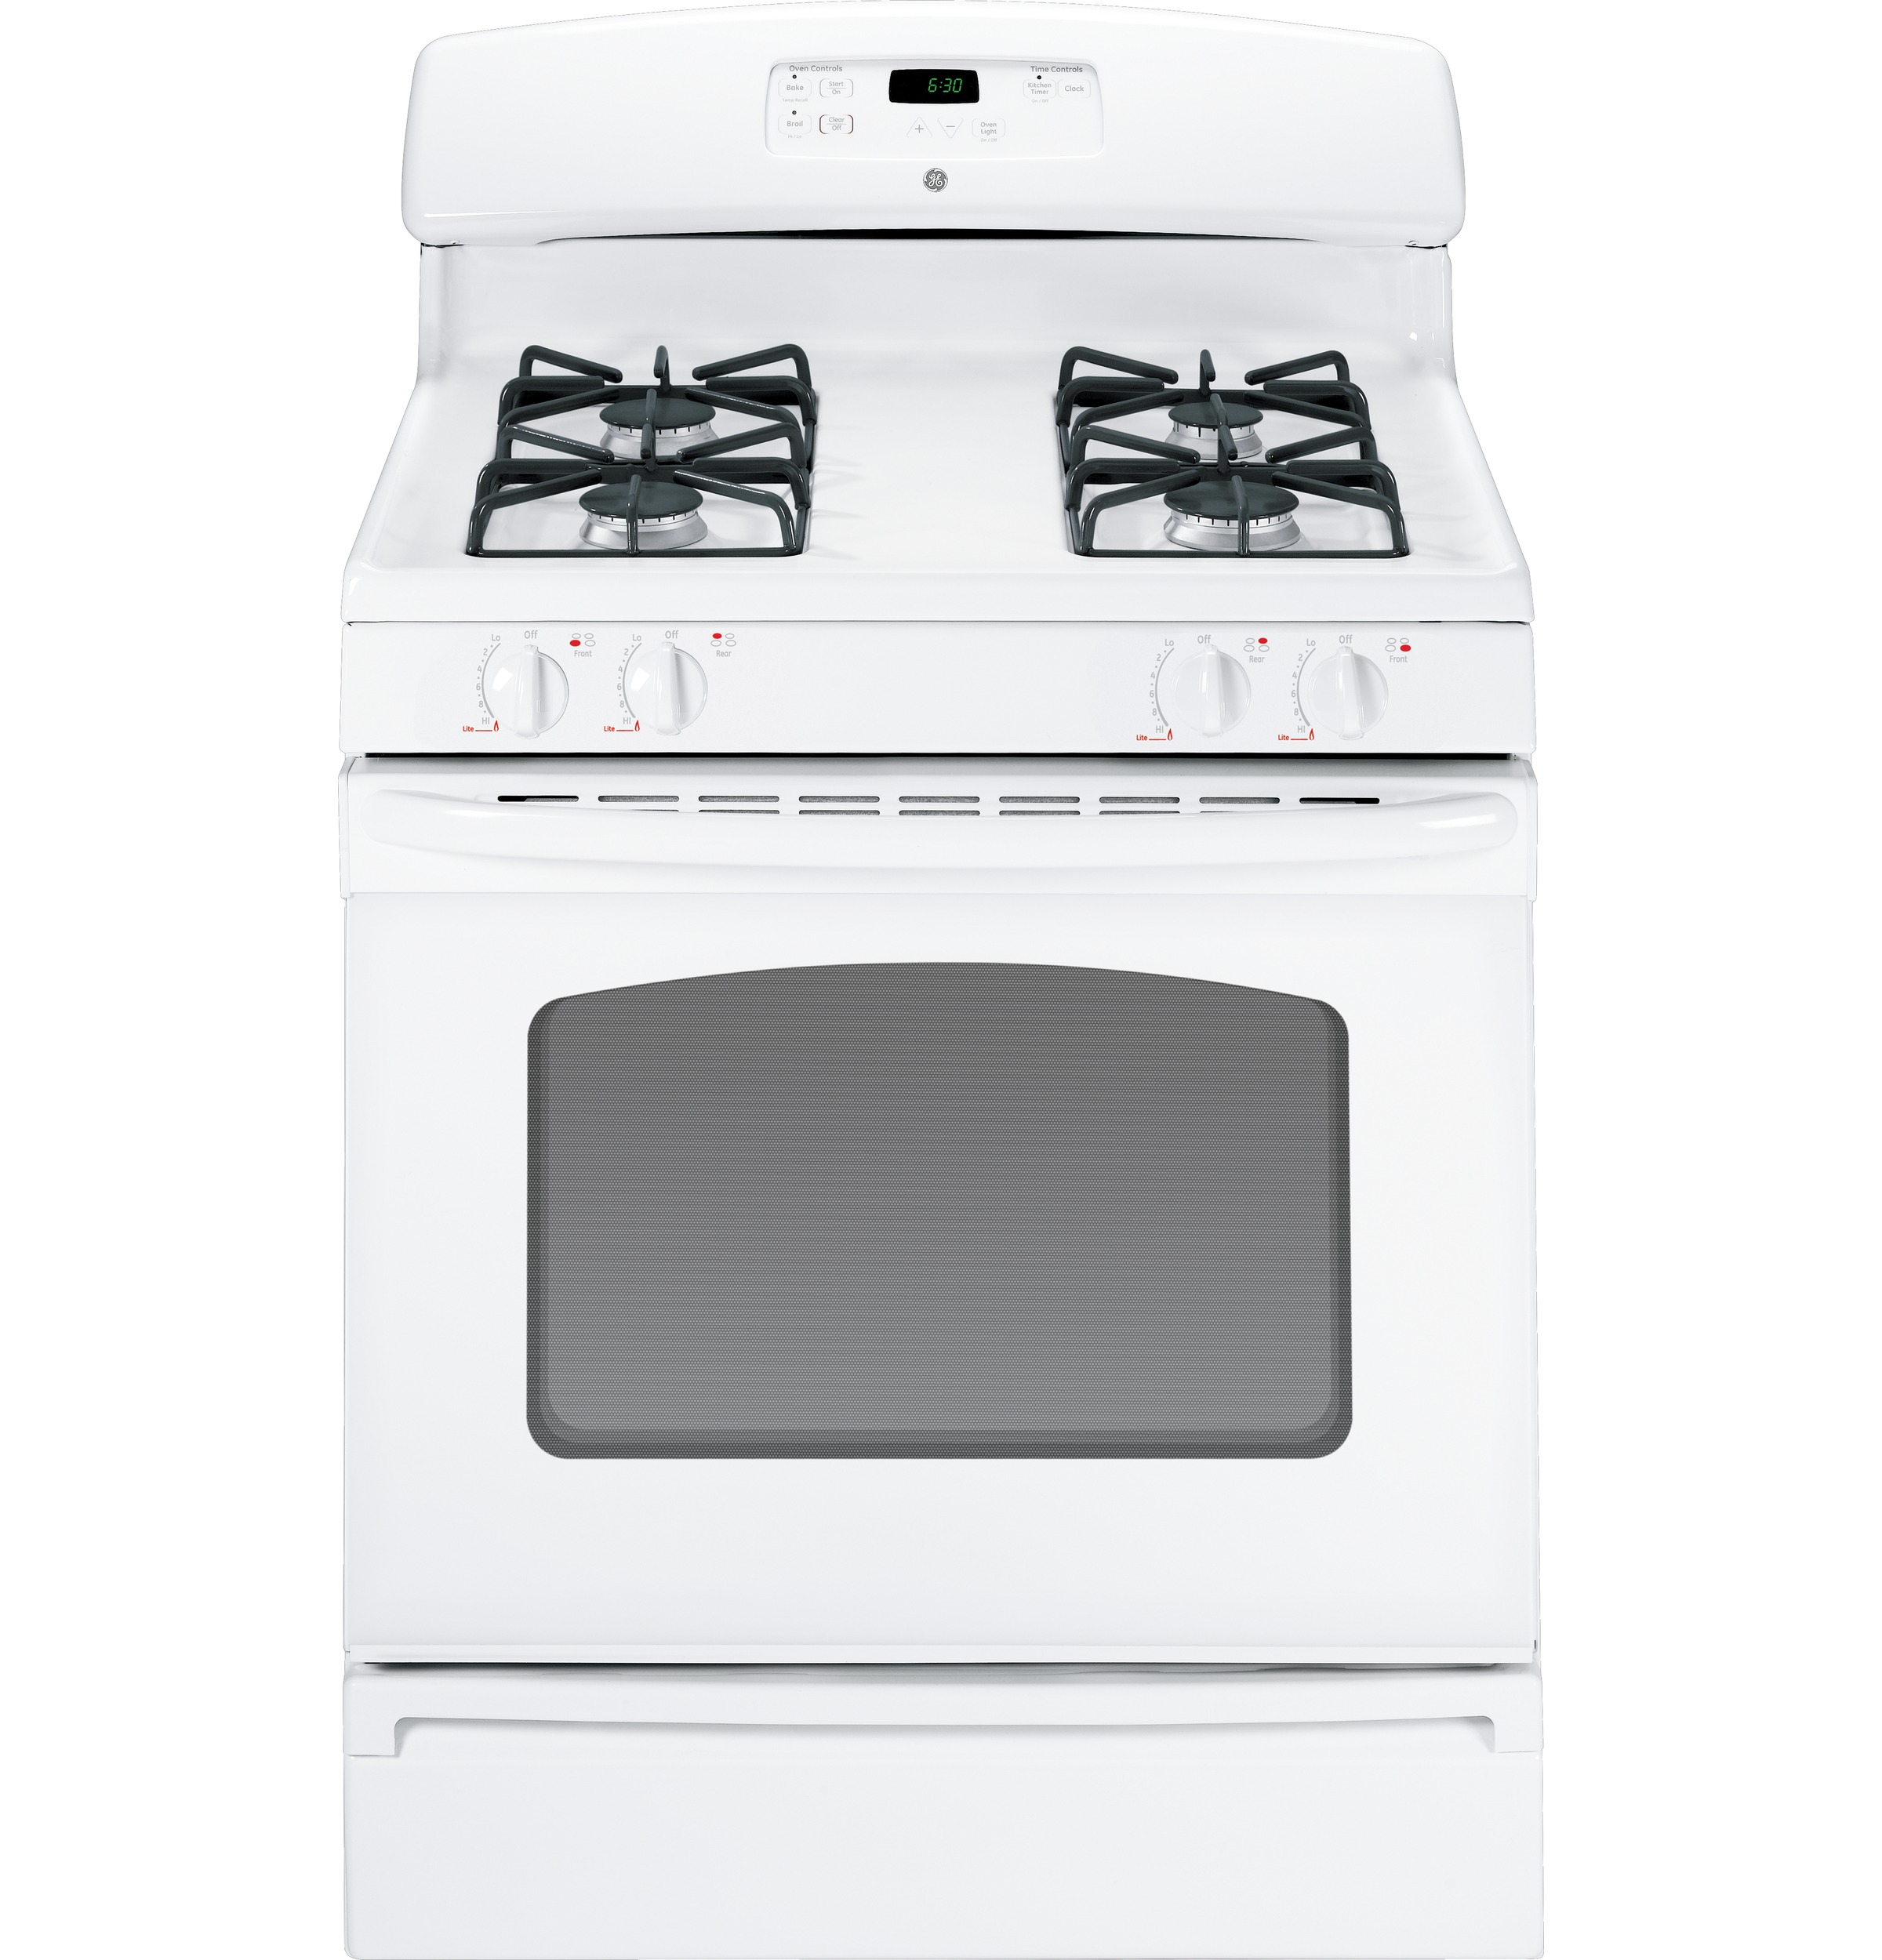 General Electric JGBS18DETWW 30" Freestanding Gas Range with 4 Sealed